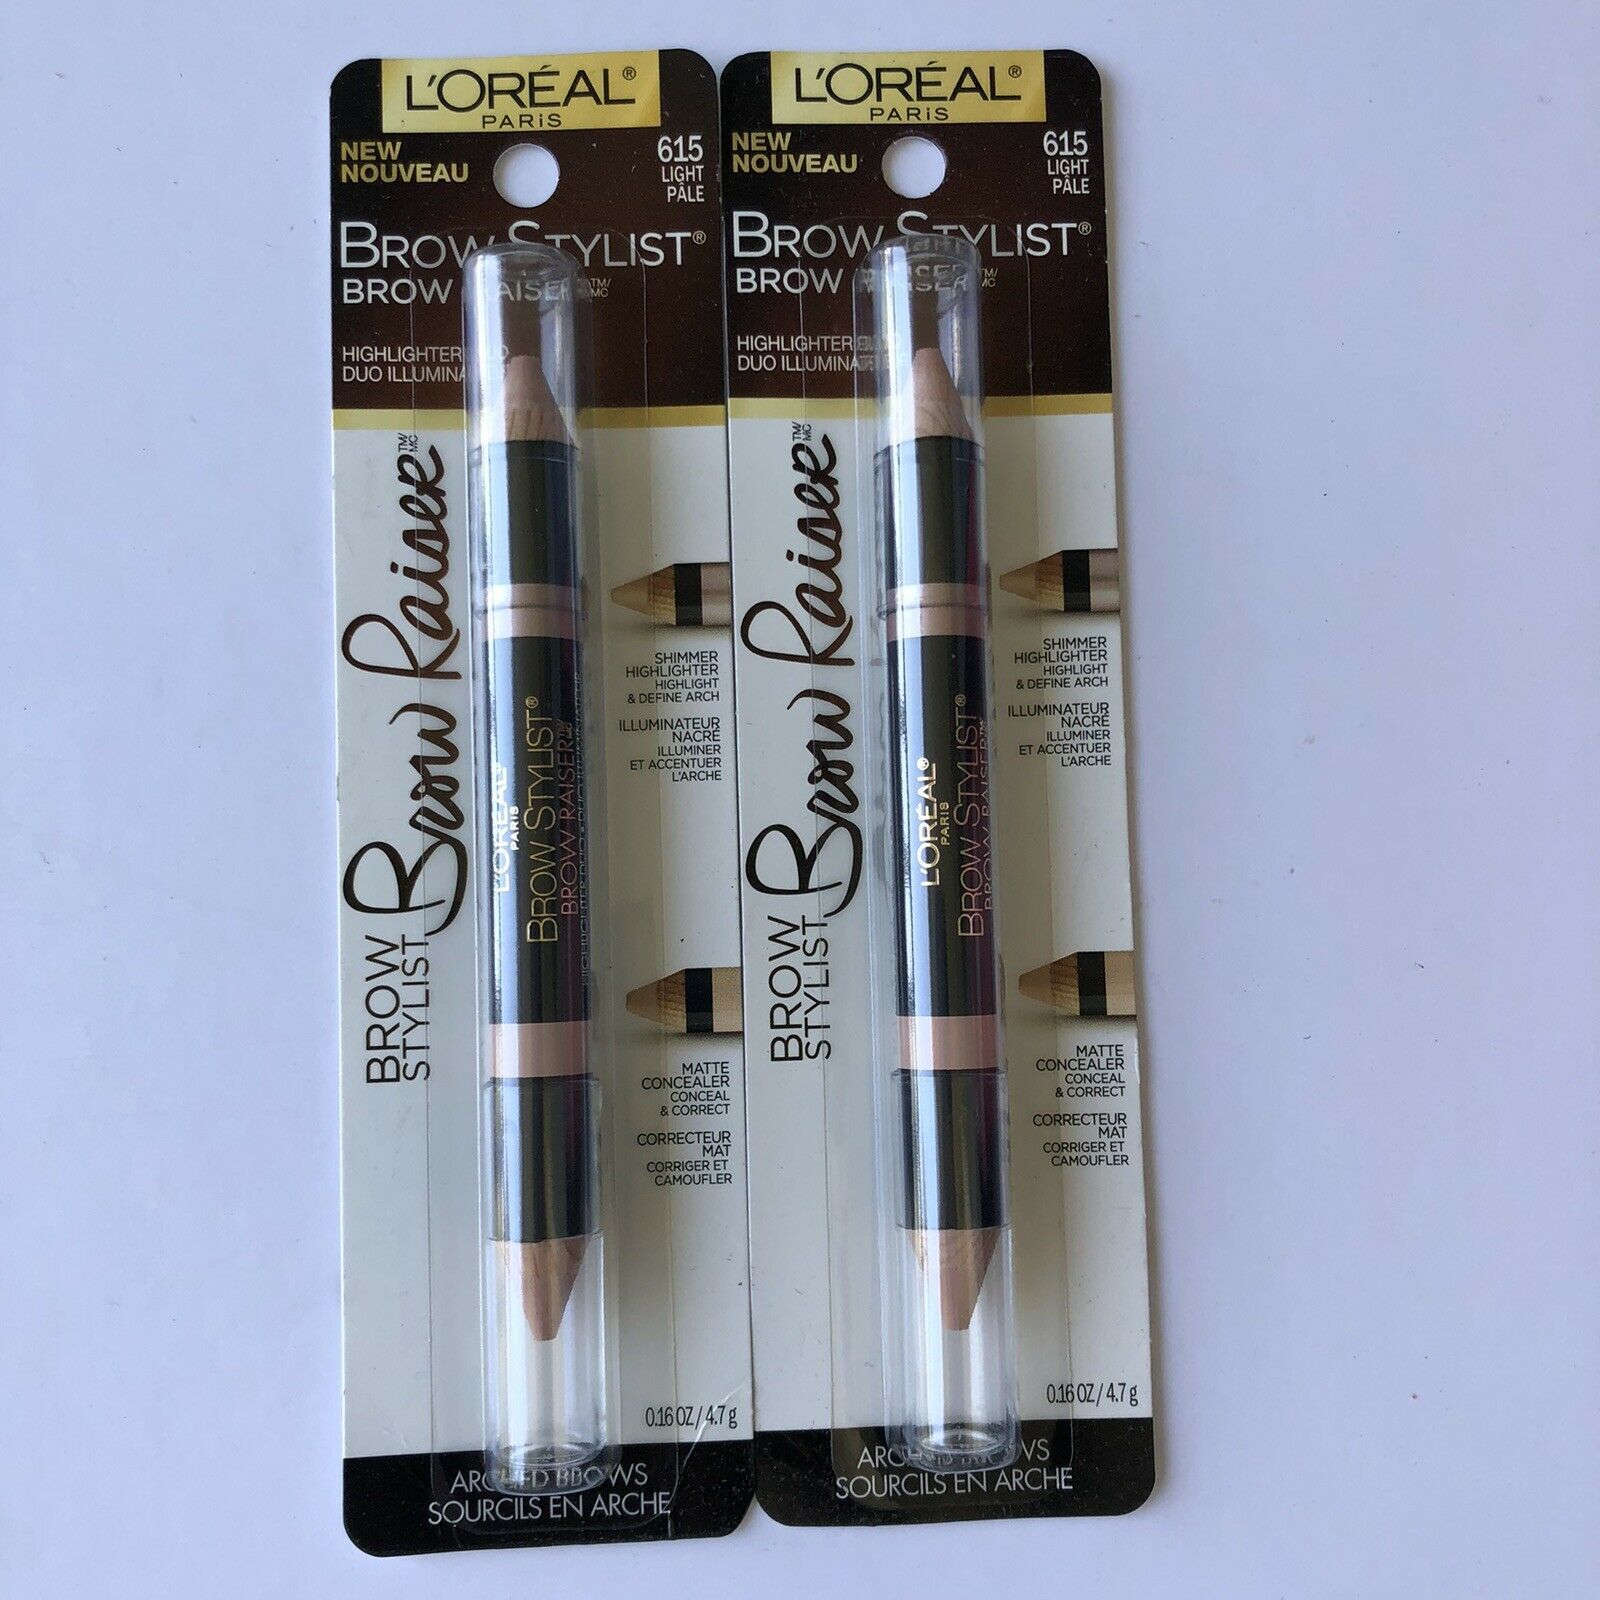 Primary image for 2 X Loreal Brow Stylist Brow Raiser Highlighter Duo, 615 Light Pale